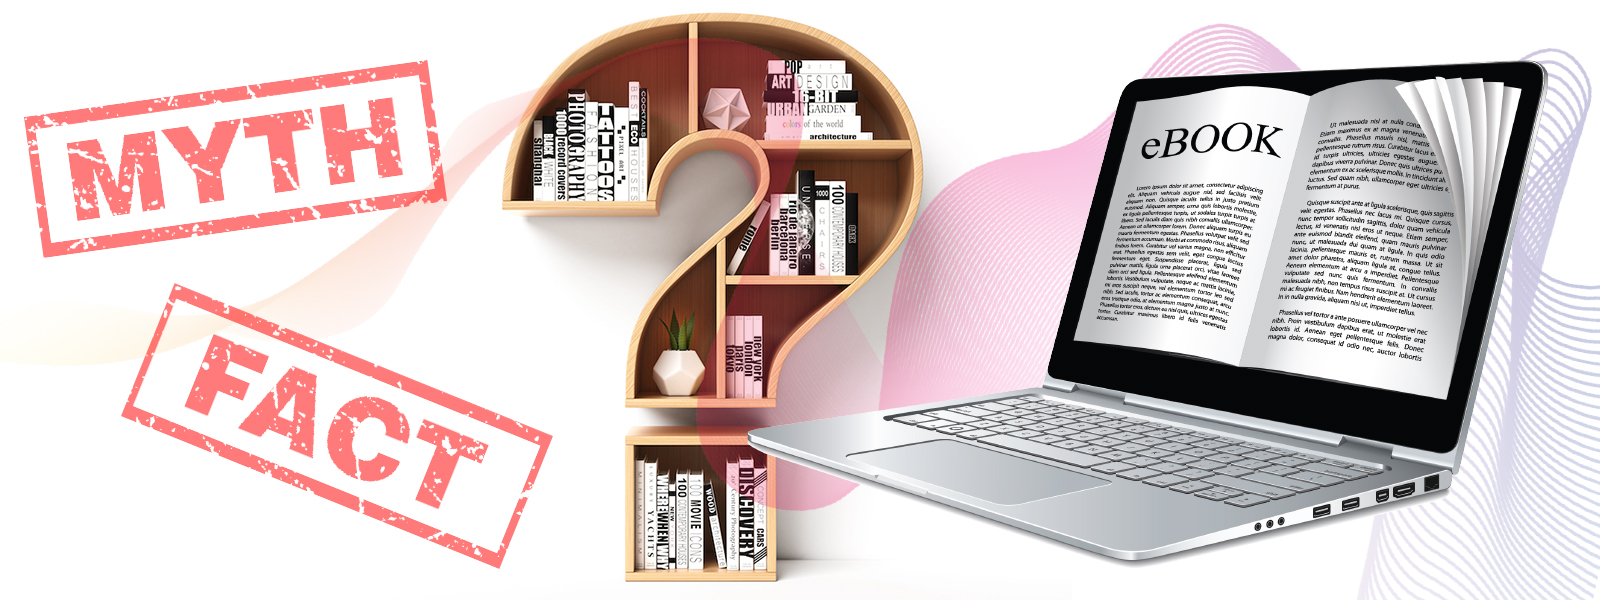 Myth stamp, Fact stamp, question mark-shaped book shelf, laptop with "ebook"  text on screen